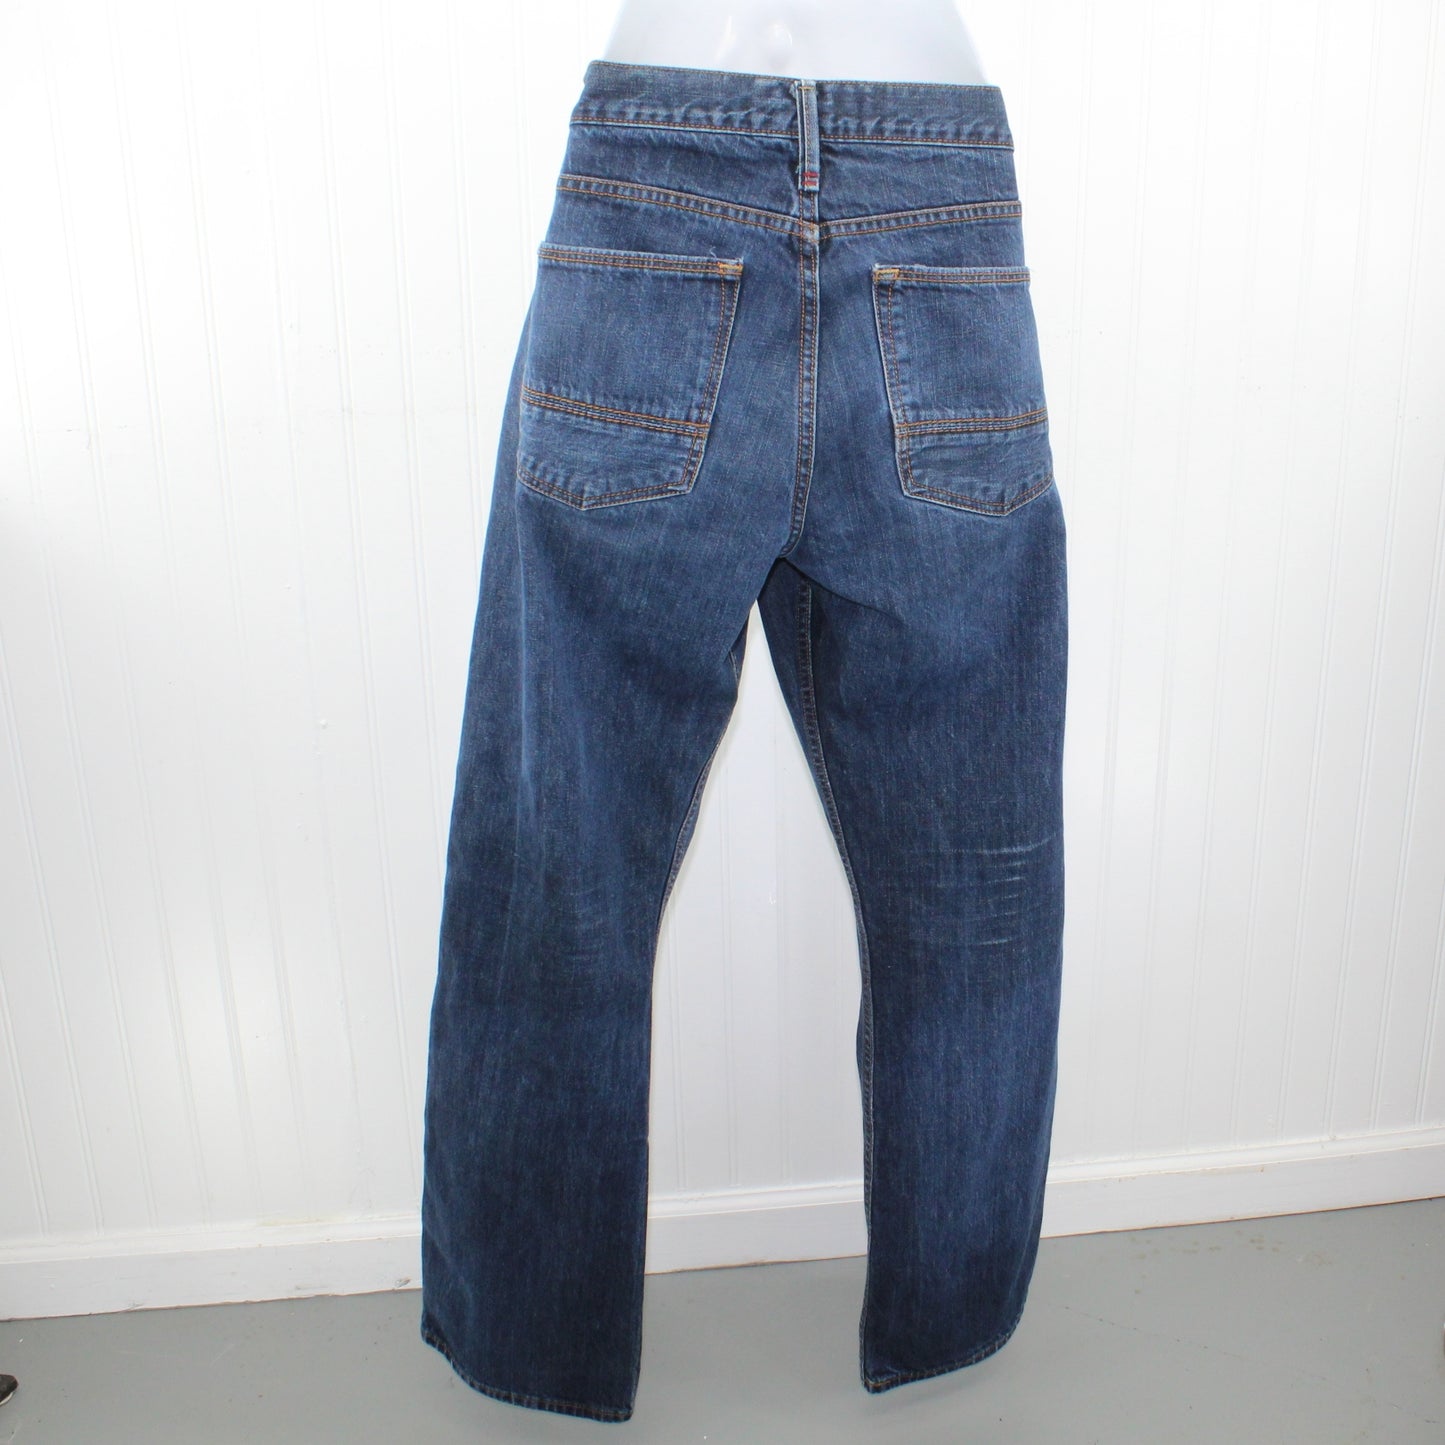 Arizona 100% Cotton Jeans Minor Distress 32X32 Orig Boot Cut distress only over pocket front